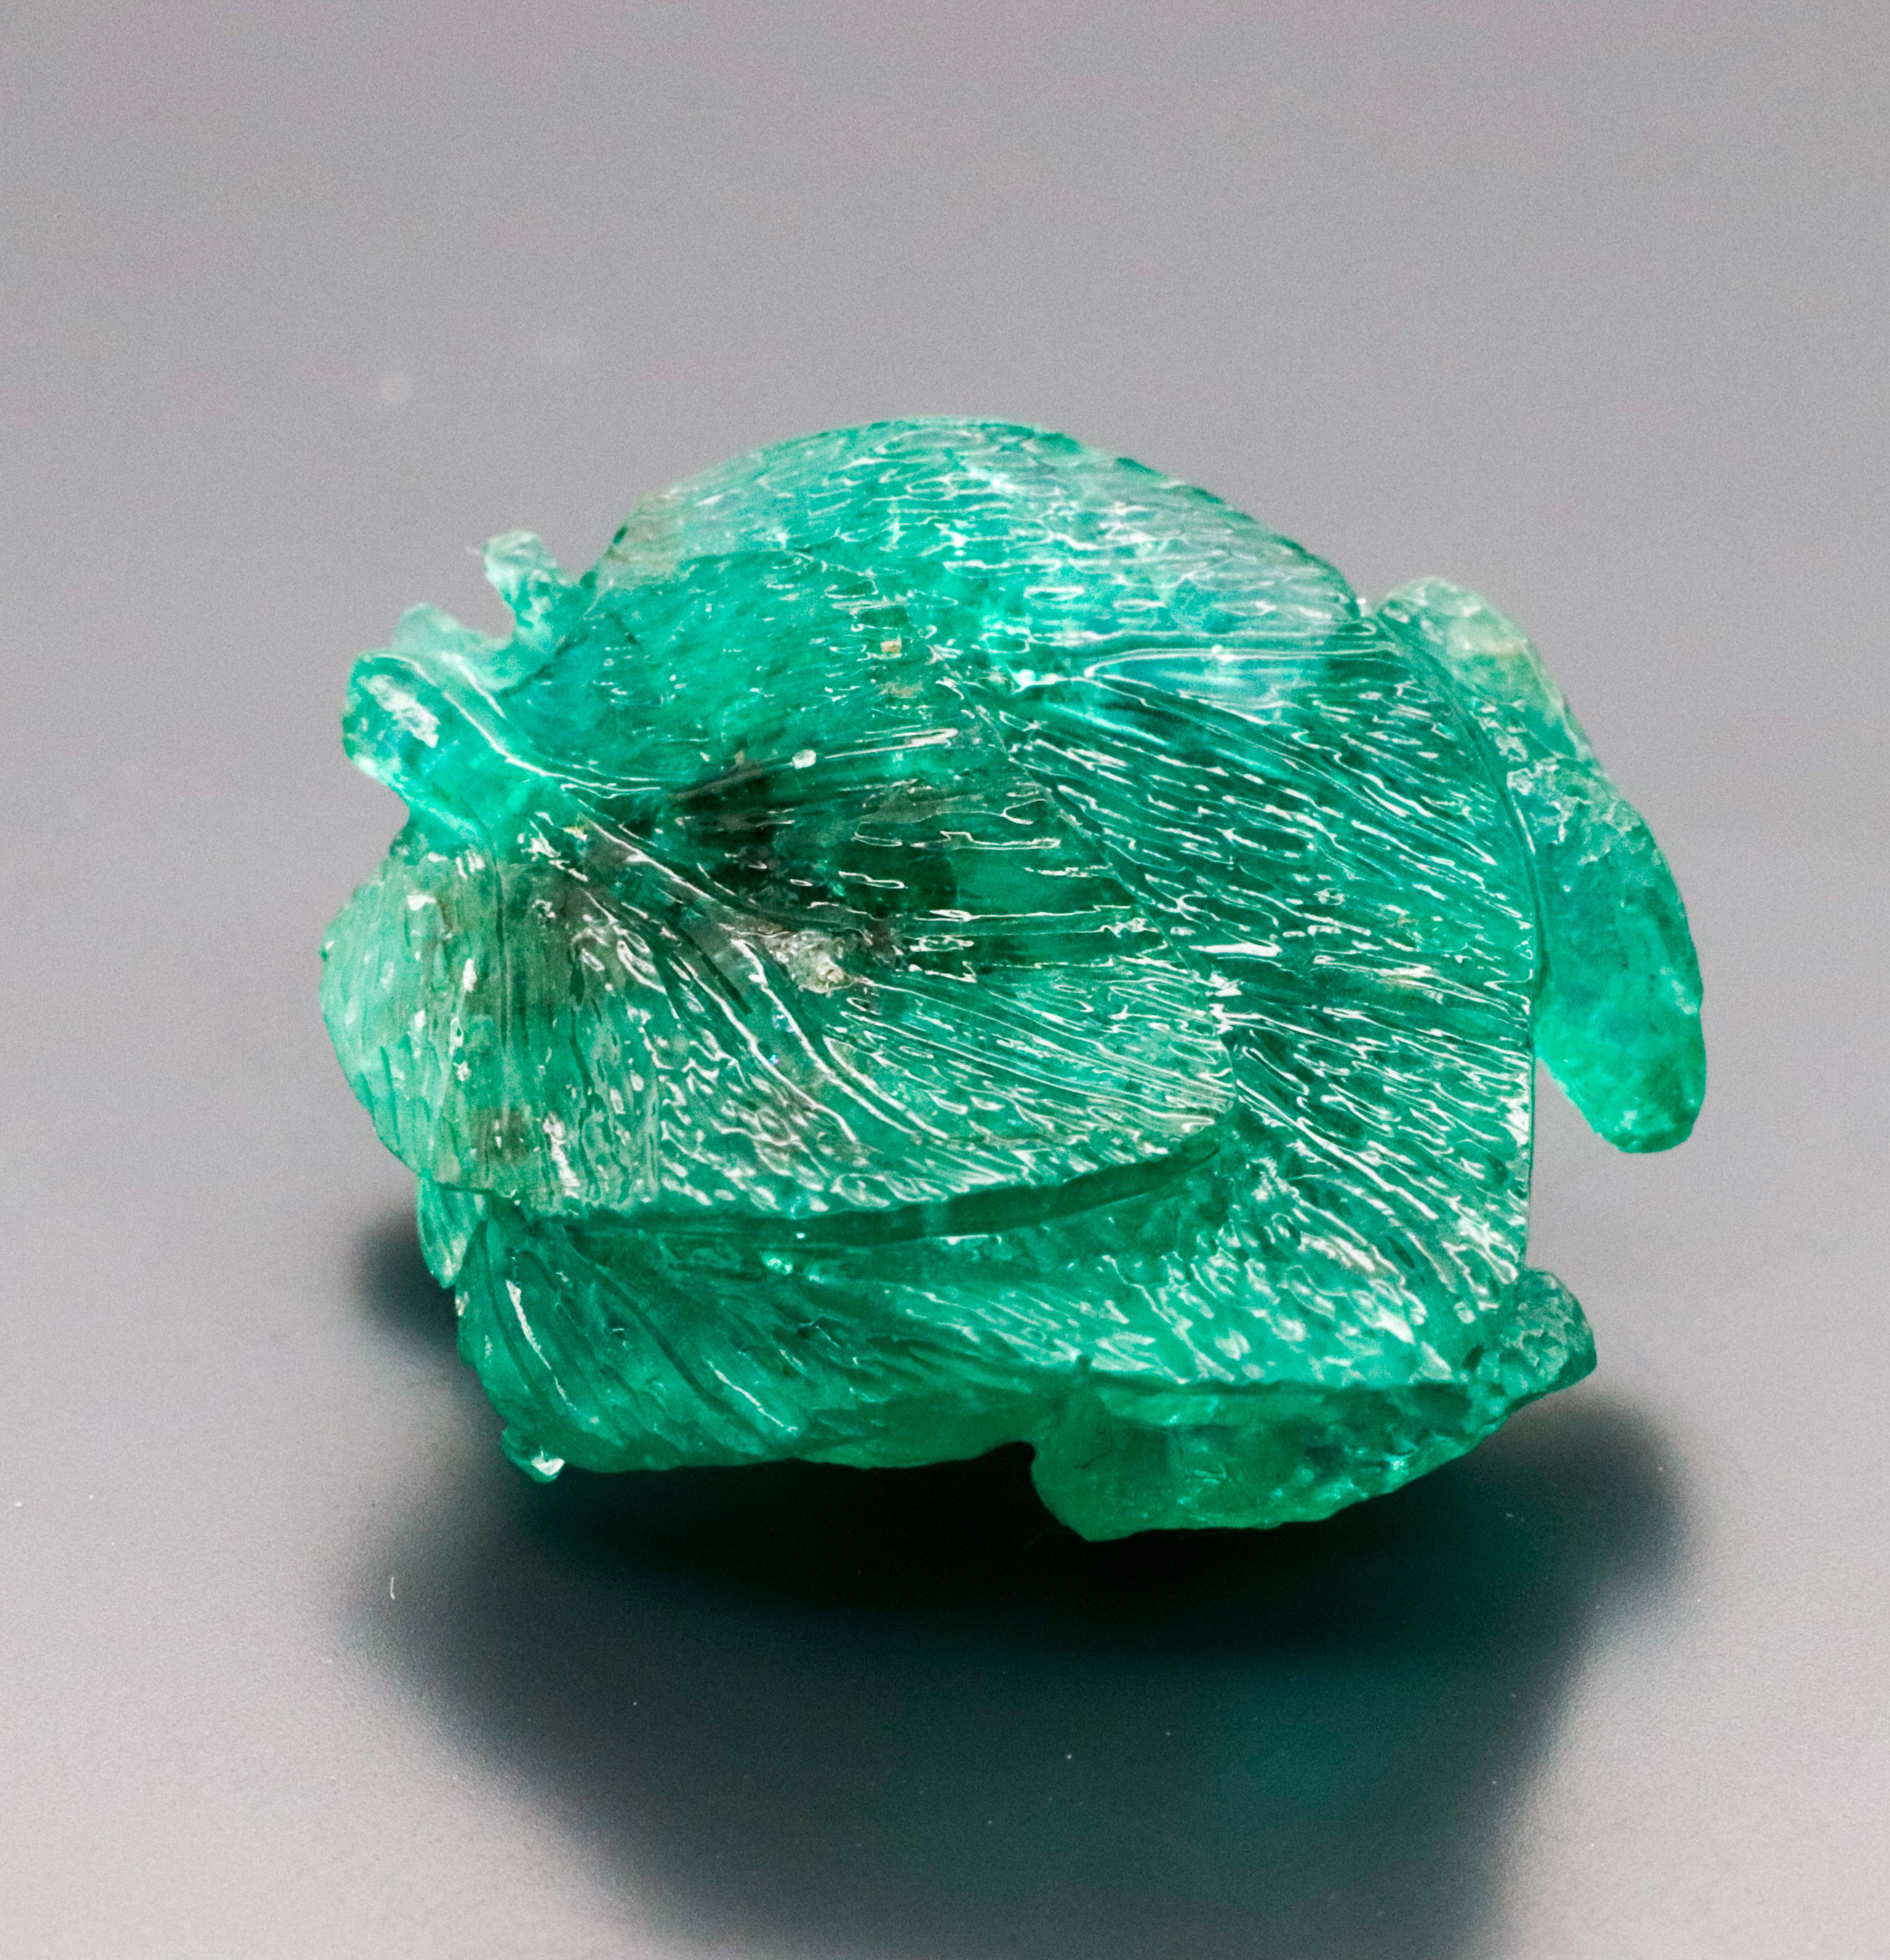 This green Emerald is curved, as if the frog is resting on a leaf. The emerald also features an exceptionally vivid green color.  It is carefully curved and expertly crafted to enhance its natural beauty and show off its lively green hue.

This